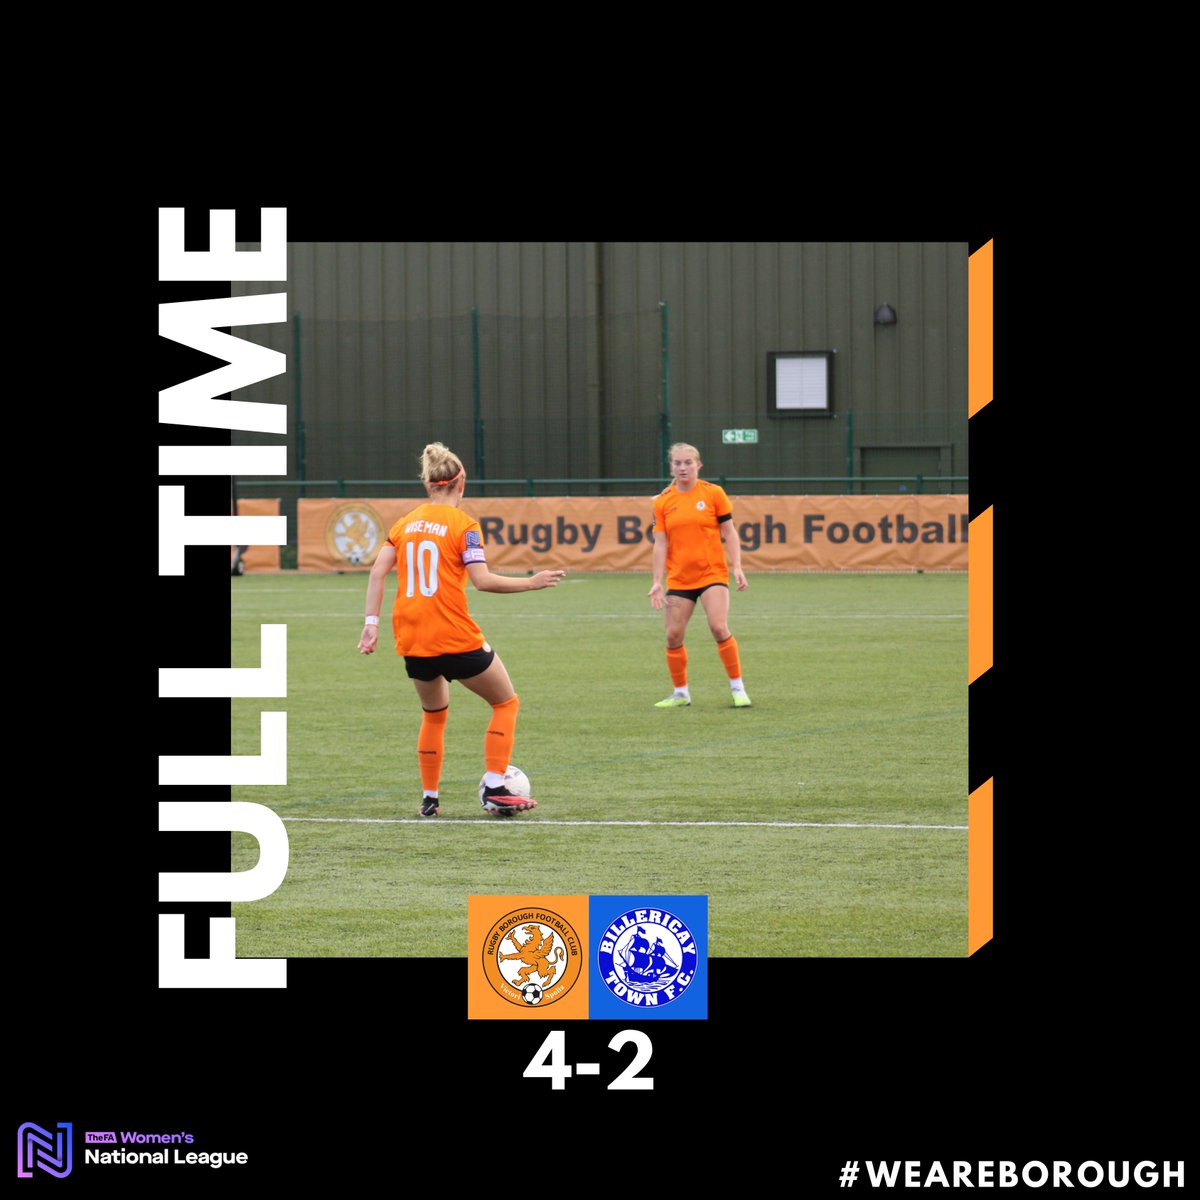 FT: Another entertaining game against Billericay, ends in victory! K. Morris ⚽ Greenslade ⚽⚽ Curwood-Wagner ⚽ #RBWFC #WeAreBorough